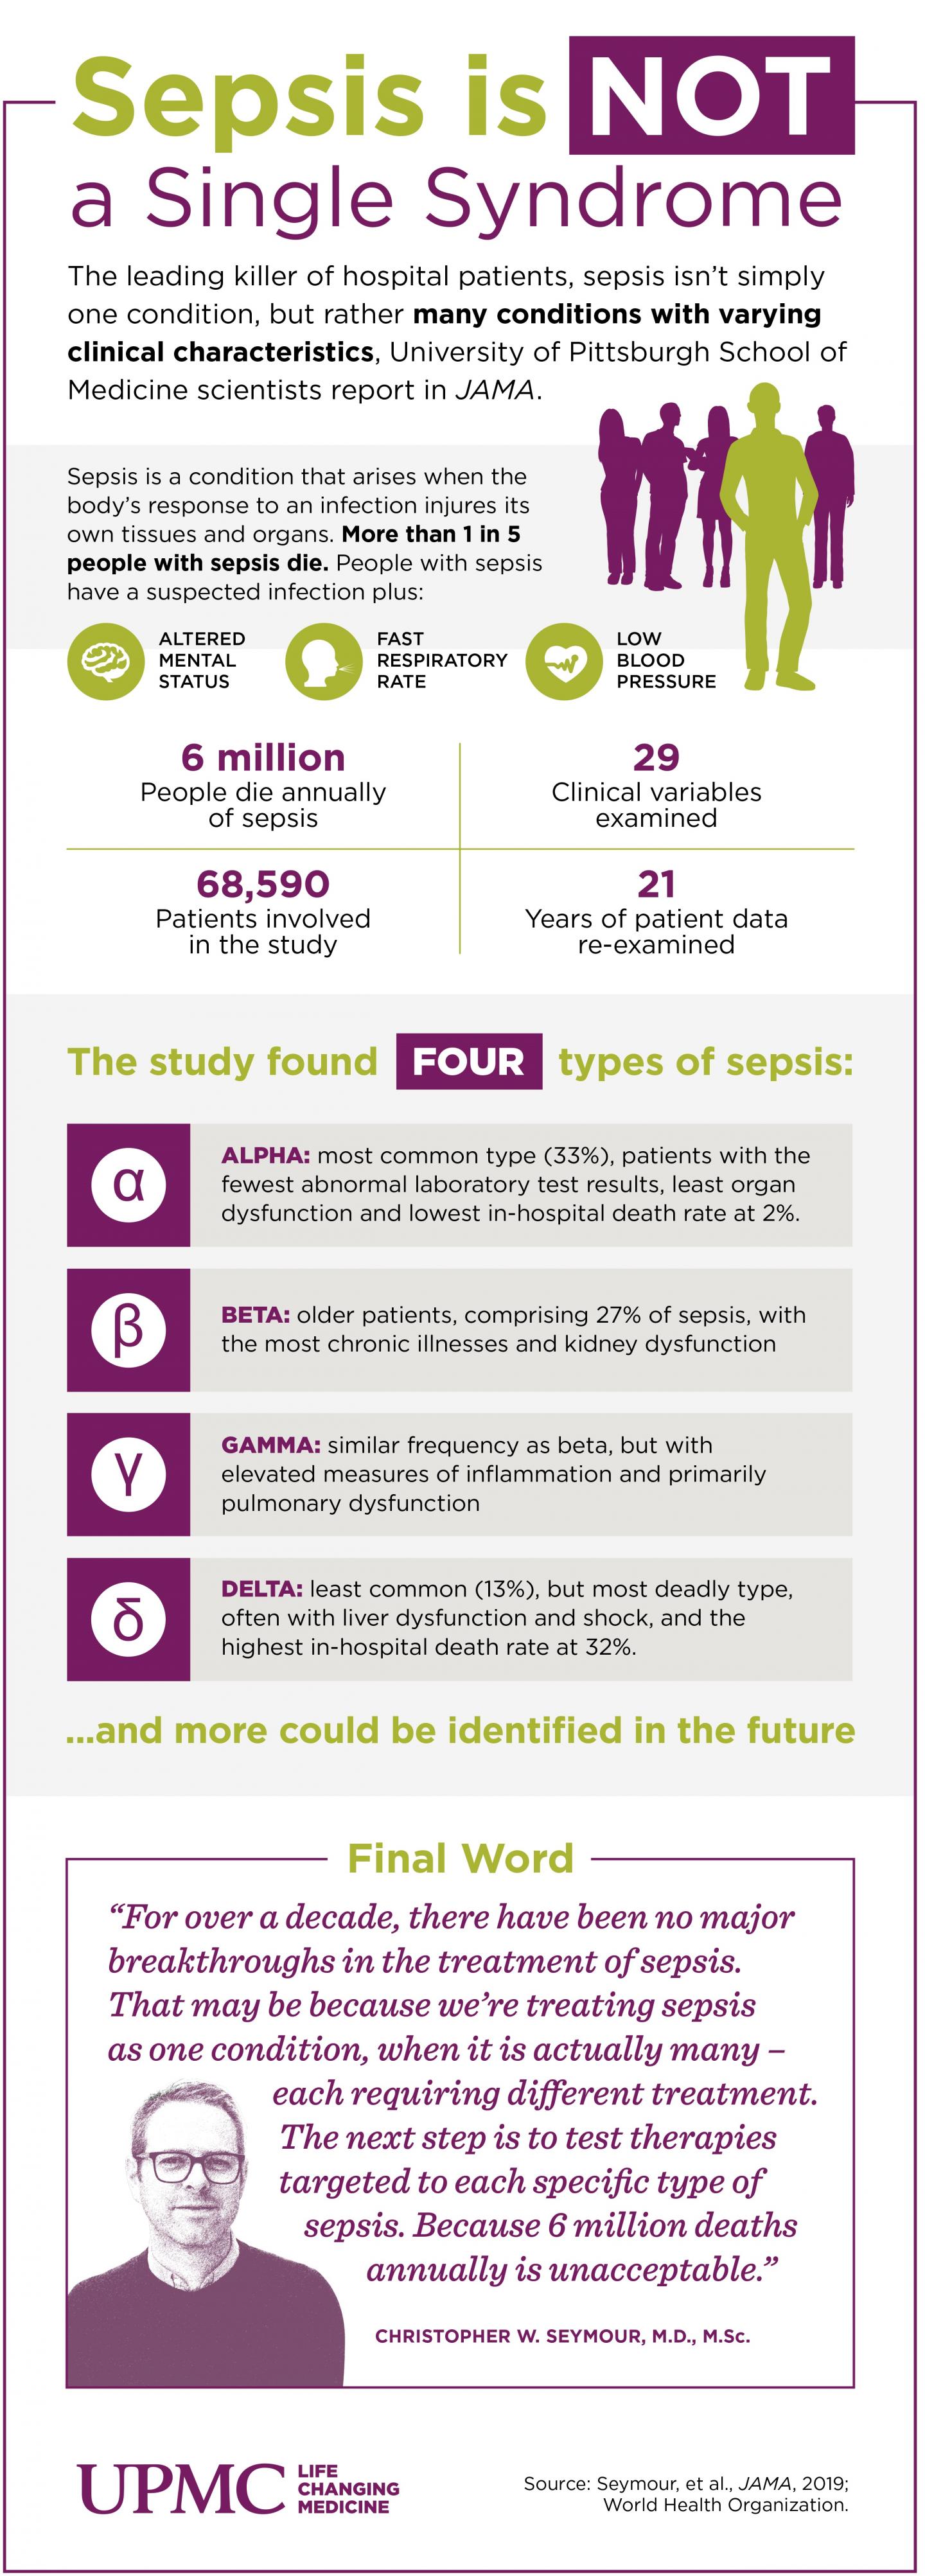 Sepsis Not a Single Syndrome Infographic